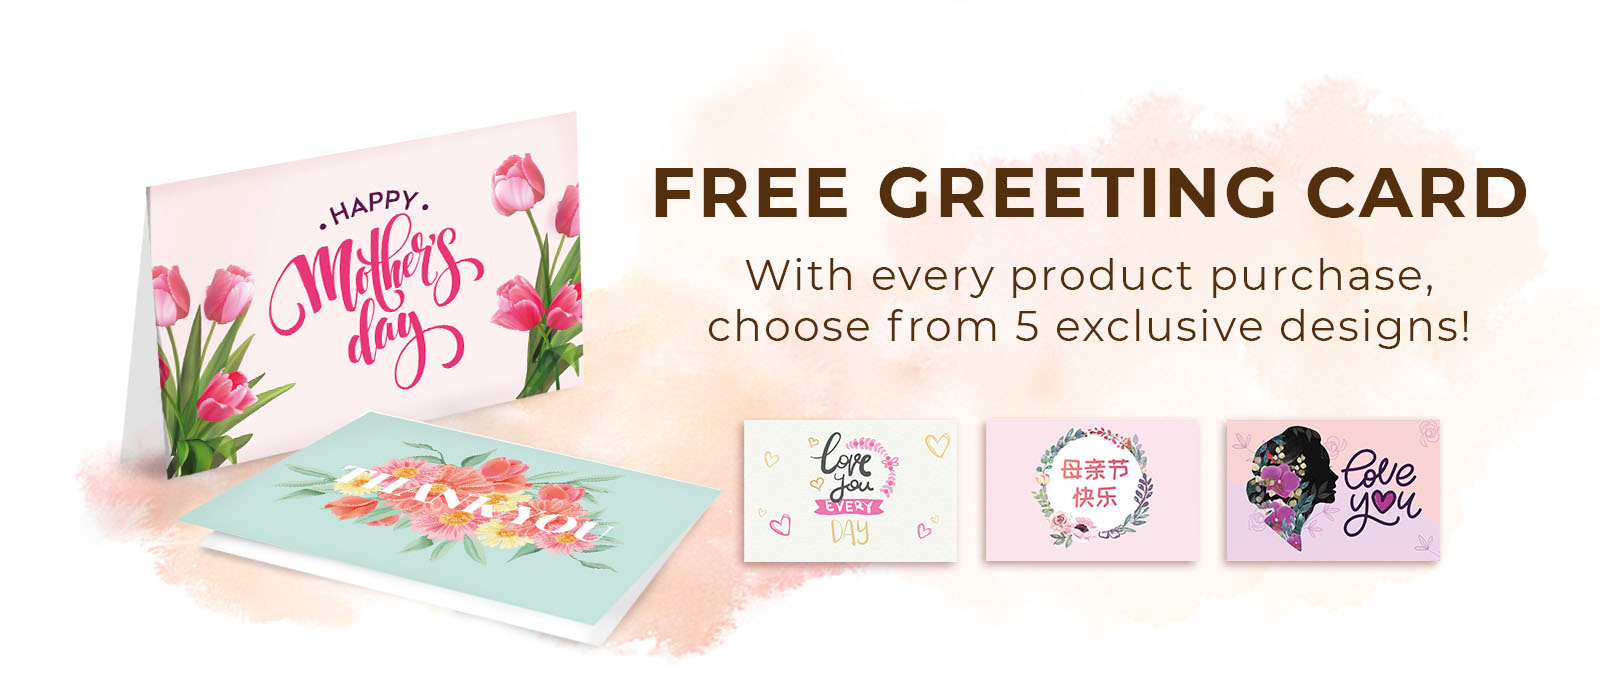 MDAY Free Greeting Card With Every Purchase!